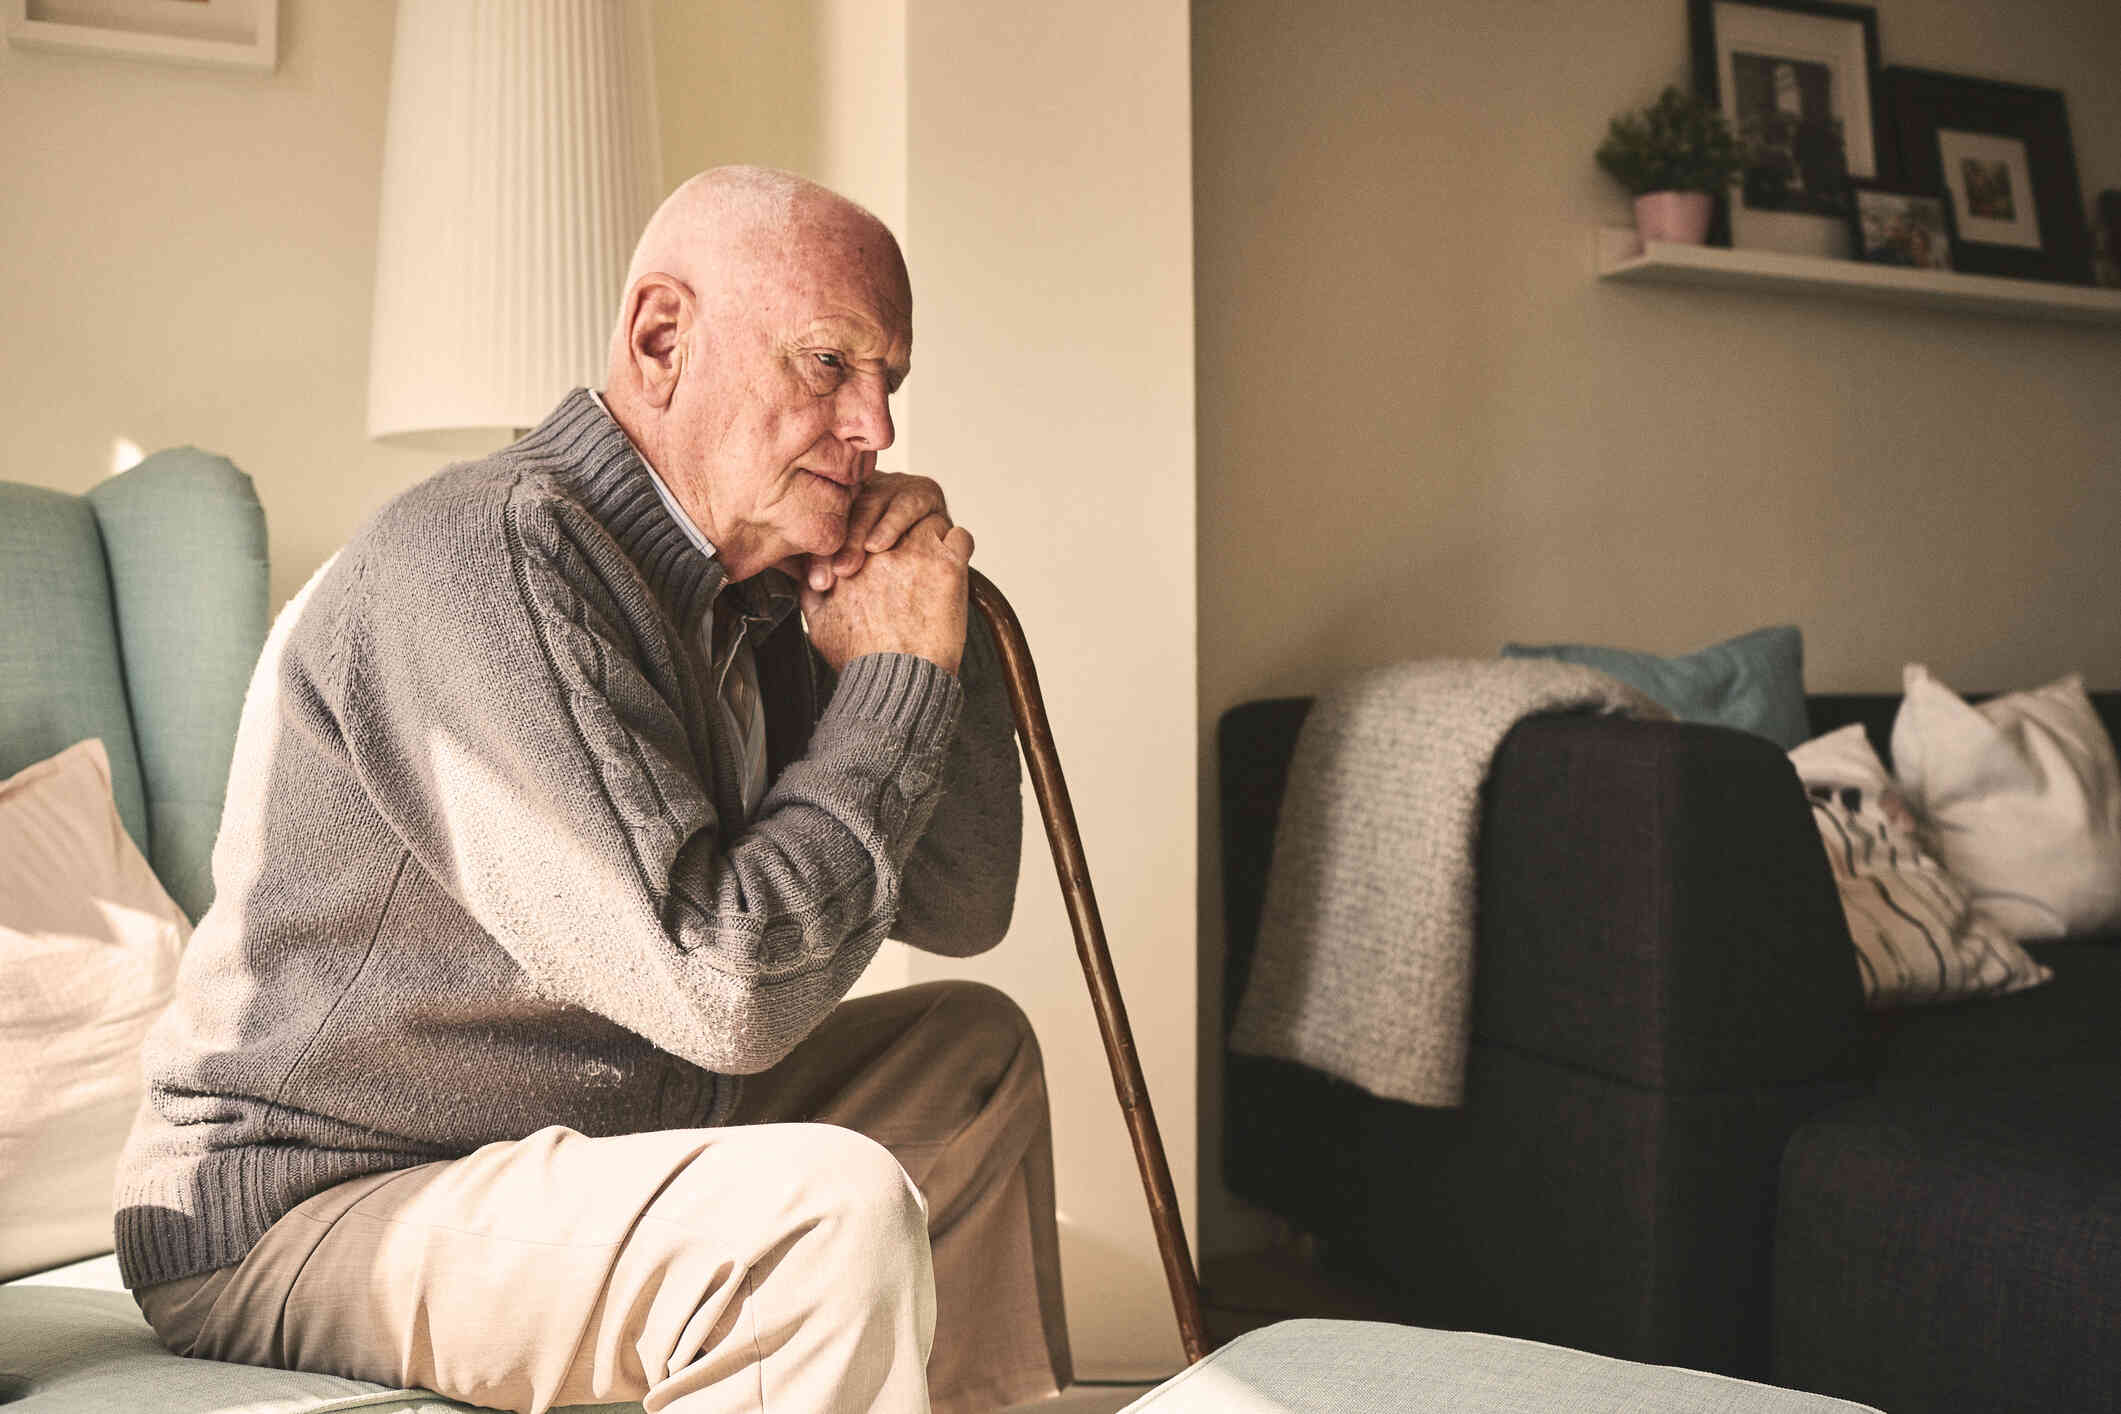 An elderly man in a tan sweater sits on a chair in his home and sadly rests his head against his cane while gazing off with a sad expression.